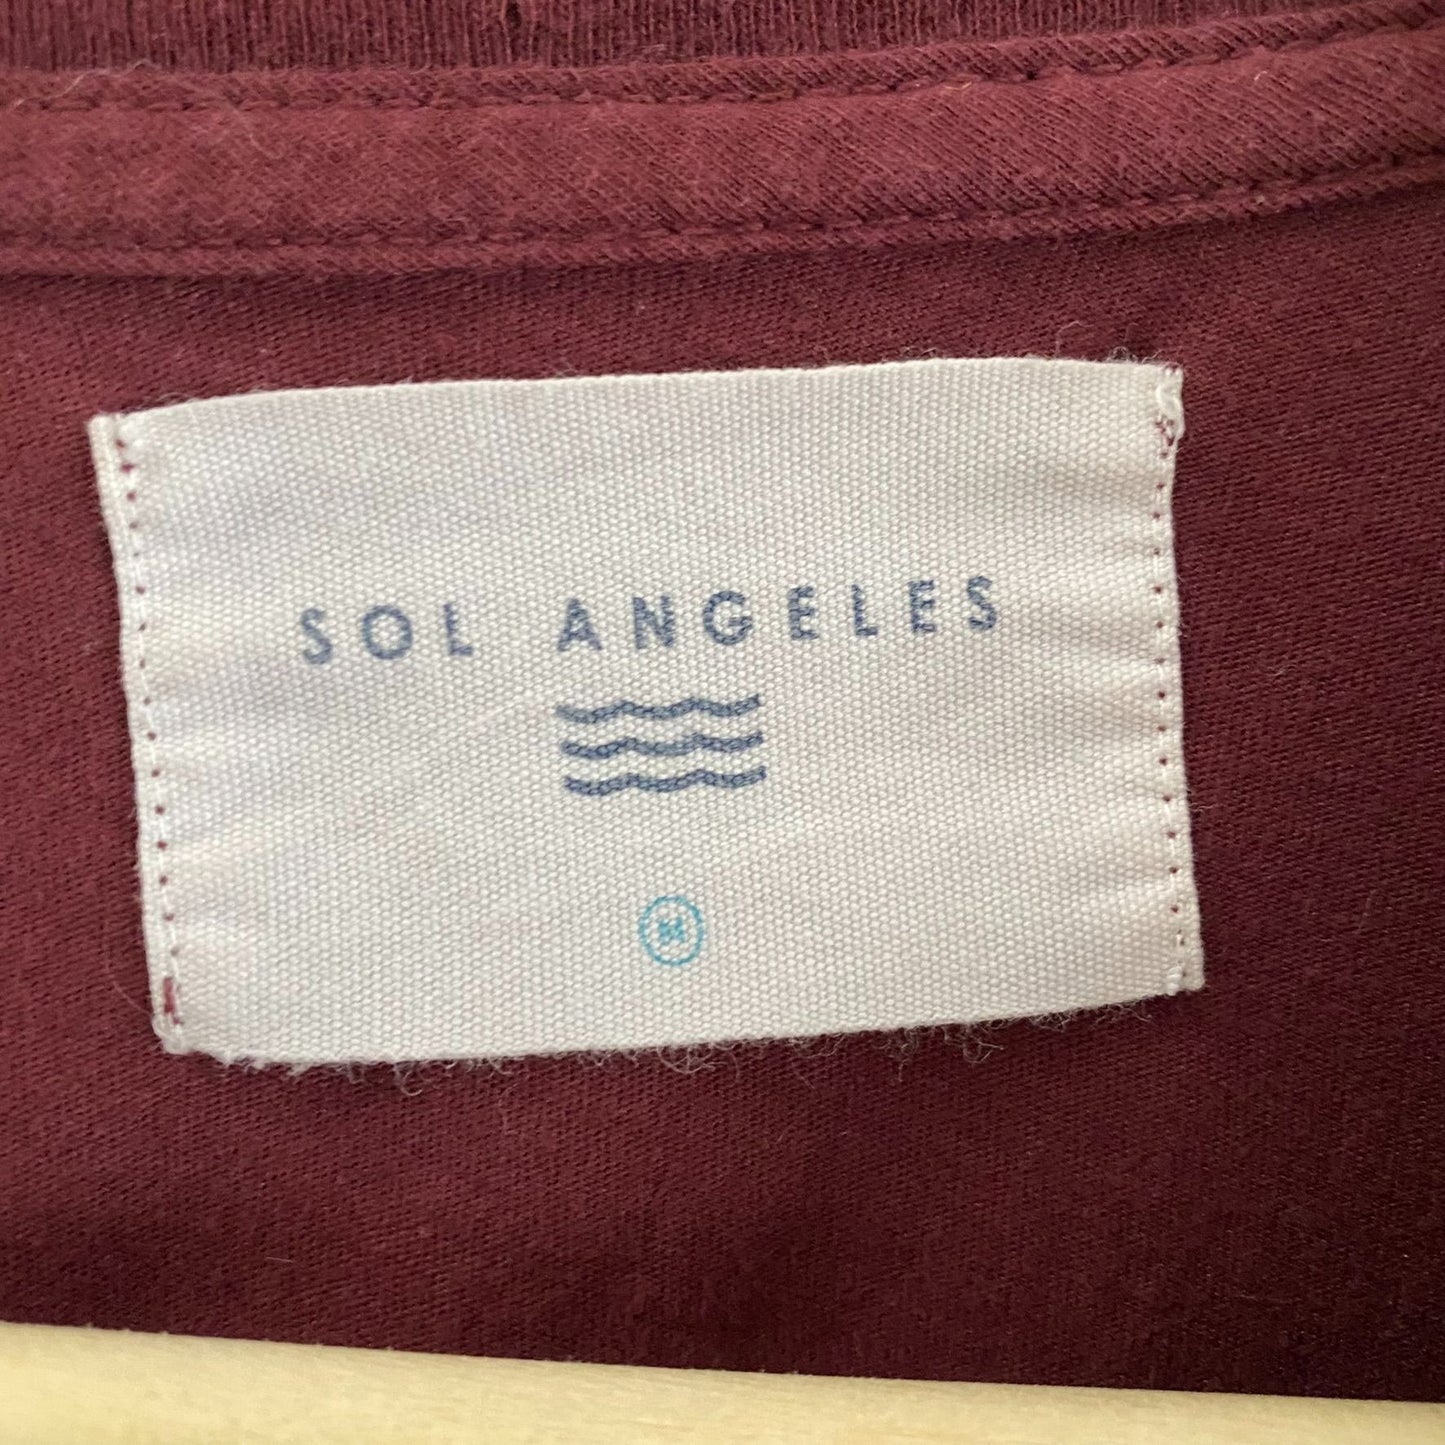 Sol Angeles Red S/S Tee